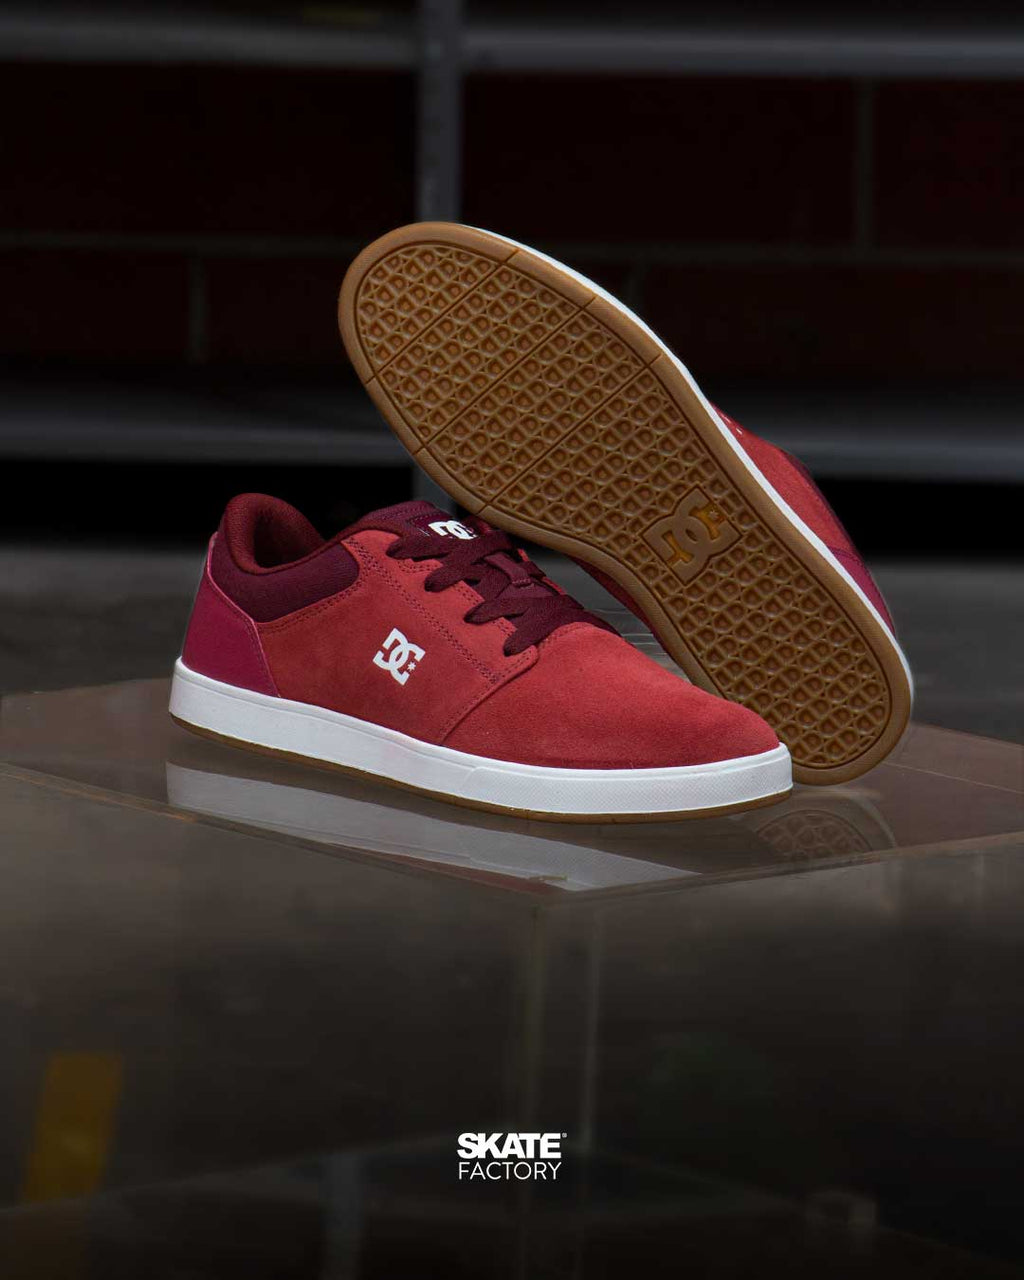 TENIS DC SHOES NOTCH CABALLERO BLANCO ROJO (WED) – Skate Factory